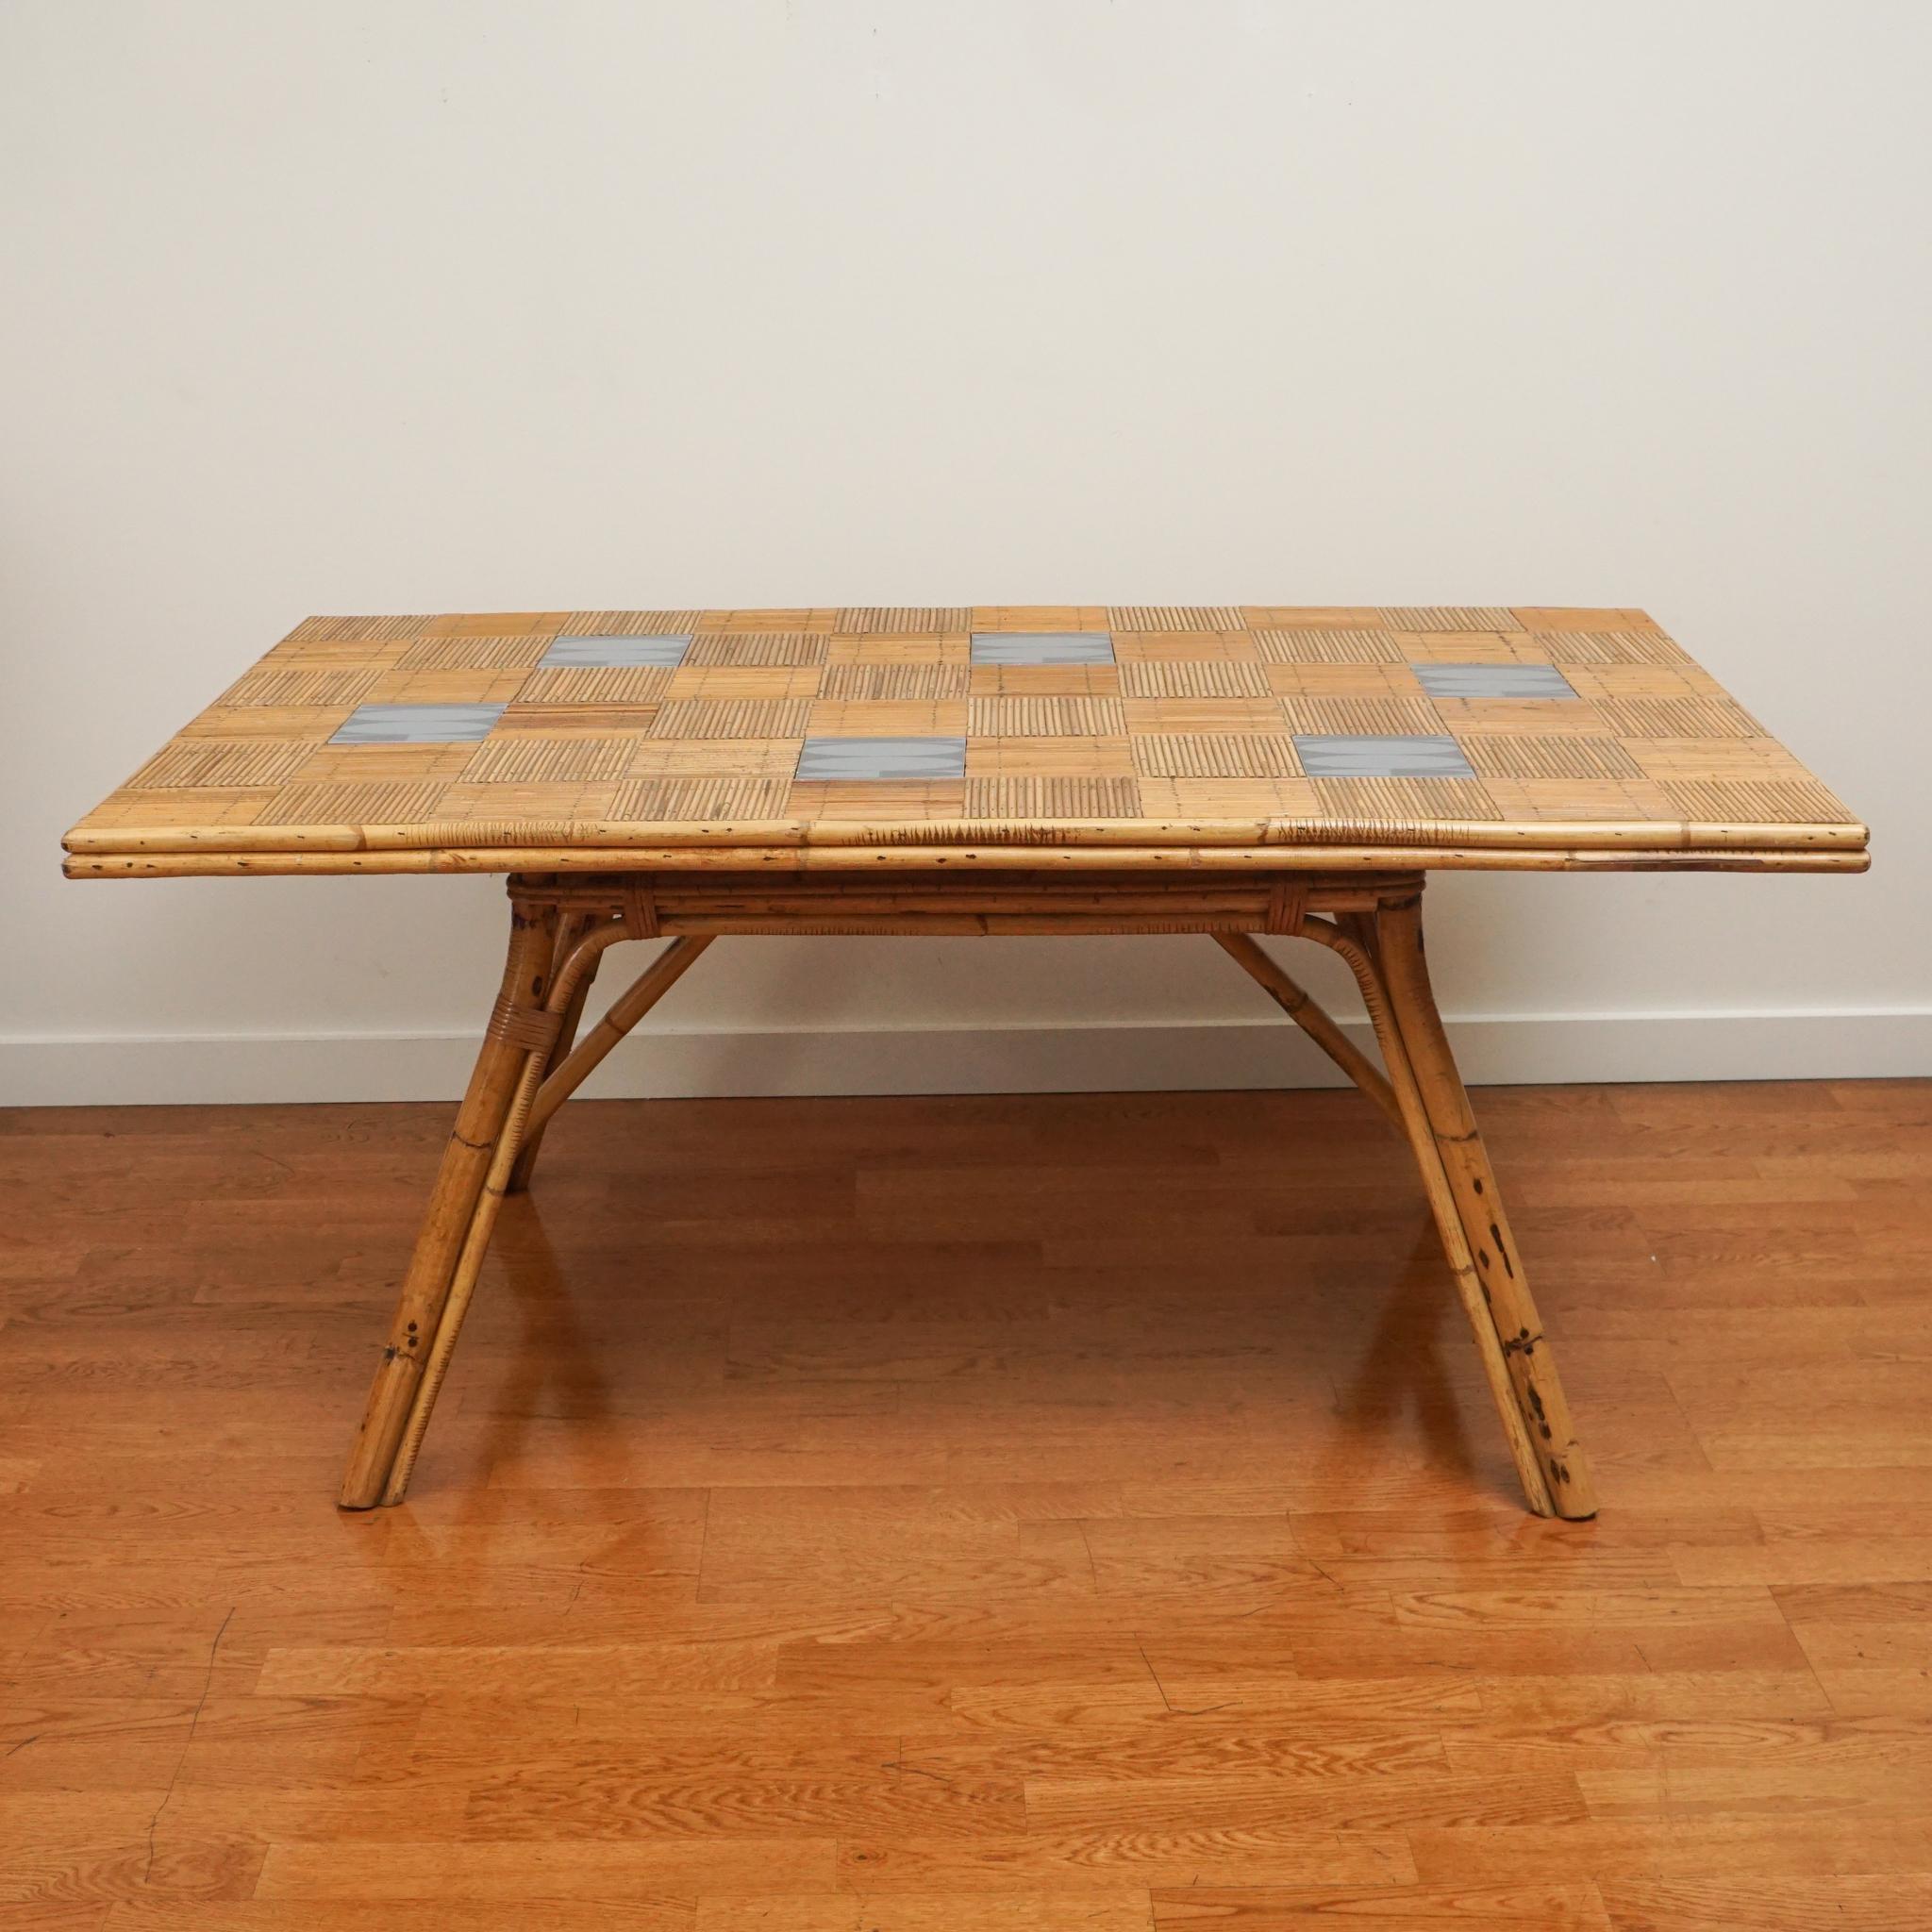 From the 1960s, this French rattan, tile-top dining table is certain to make an impression and/or set a mood. The table has been been gently restored and updated with modern ceramic tile insets. Sturdy and generously sized.